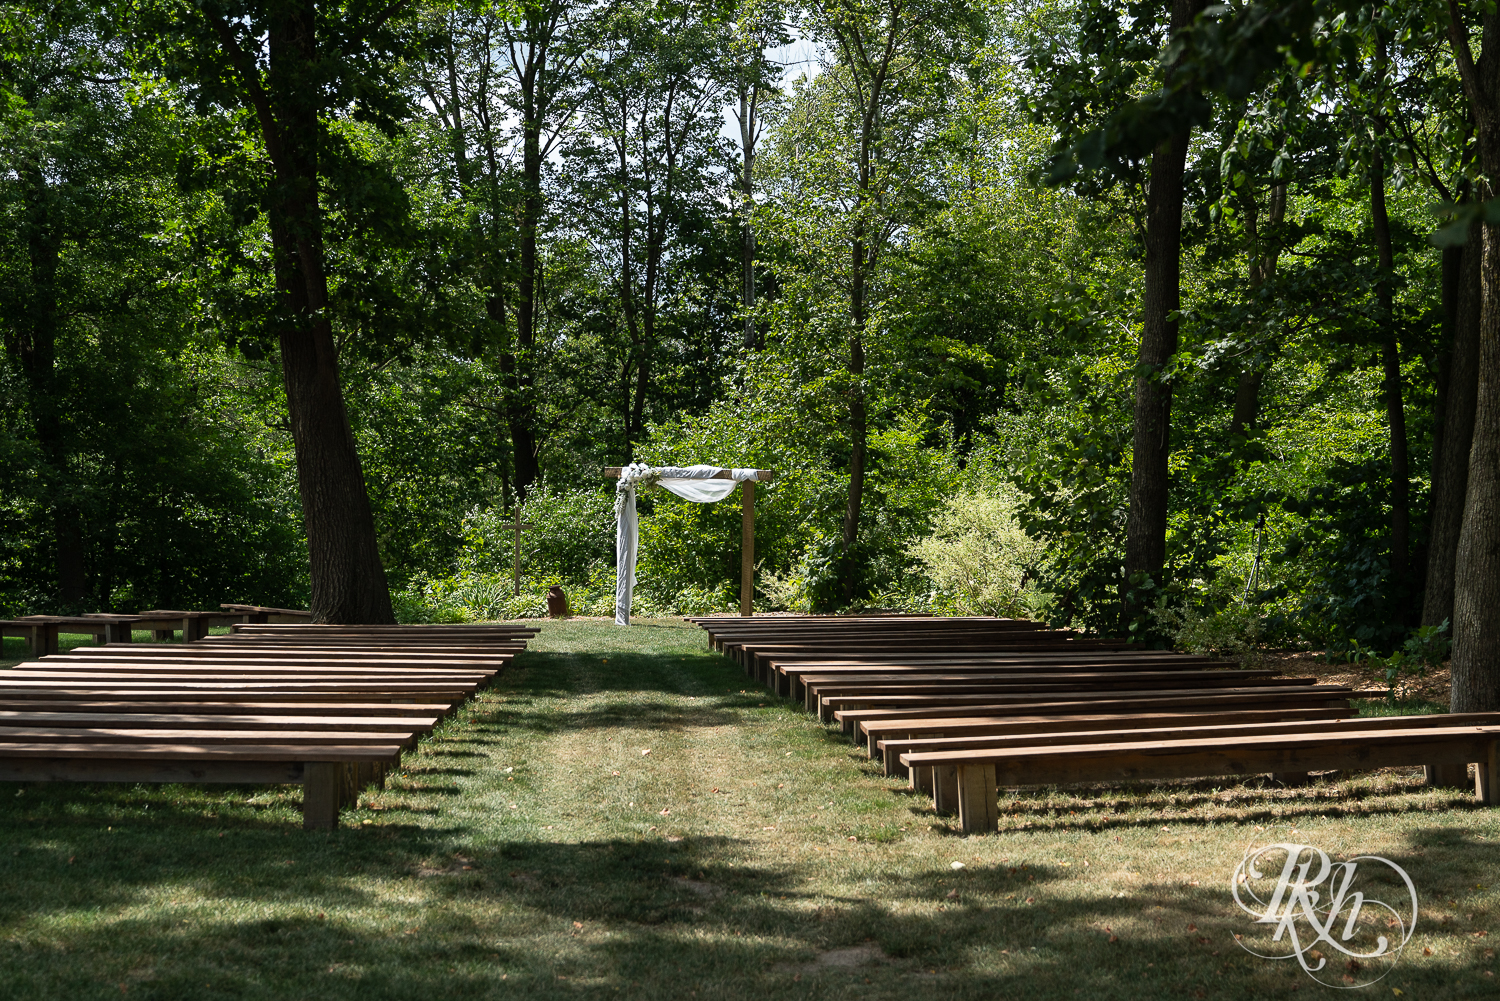 Outdoor country barn wedding ceremony setup at Croix View Farm in Osceola, Wisconsin.